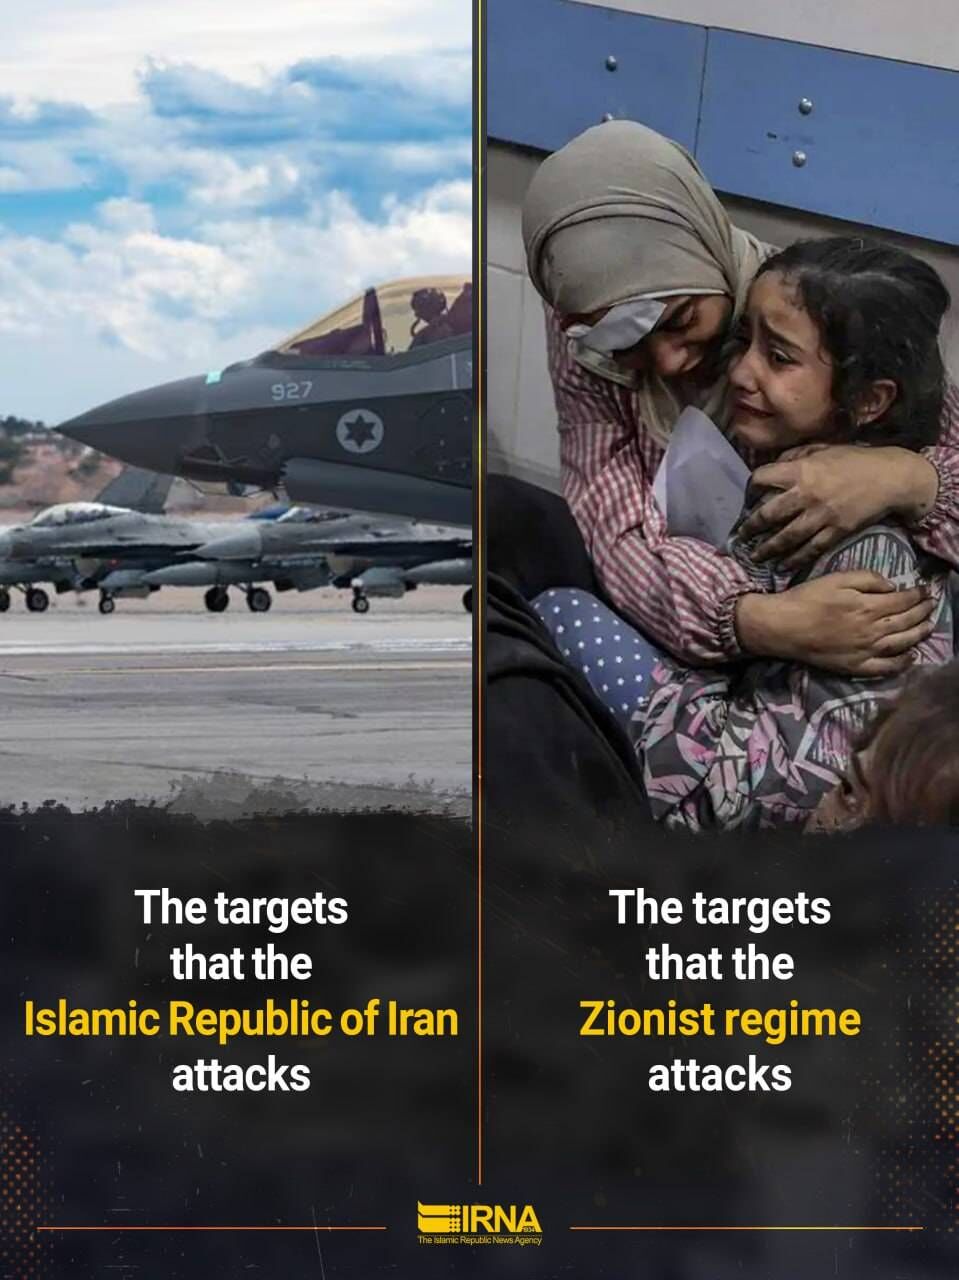 Comparing Iran, Zionist regime in terms of military targets